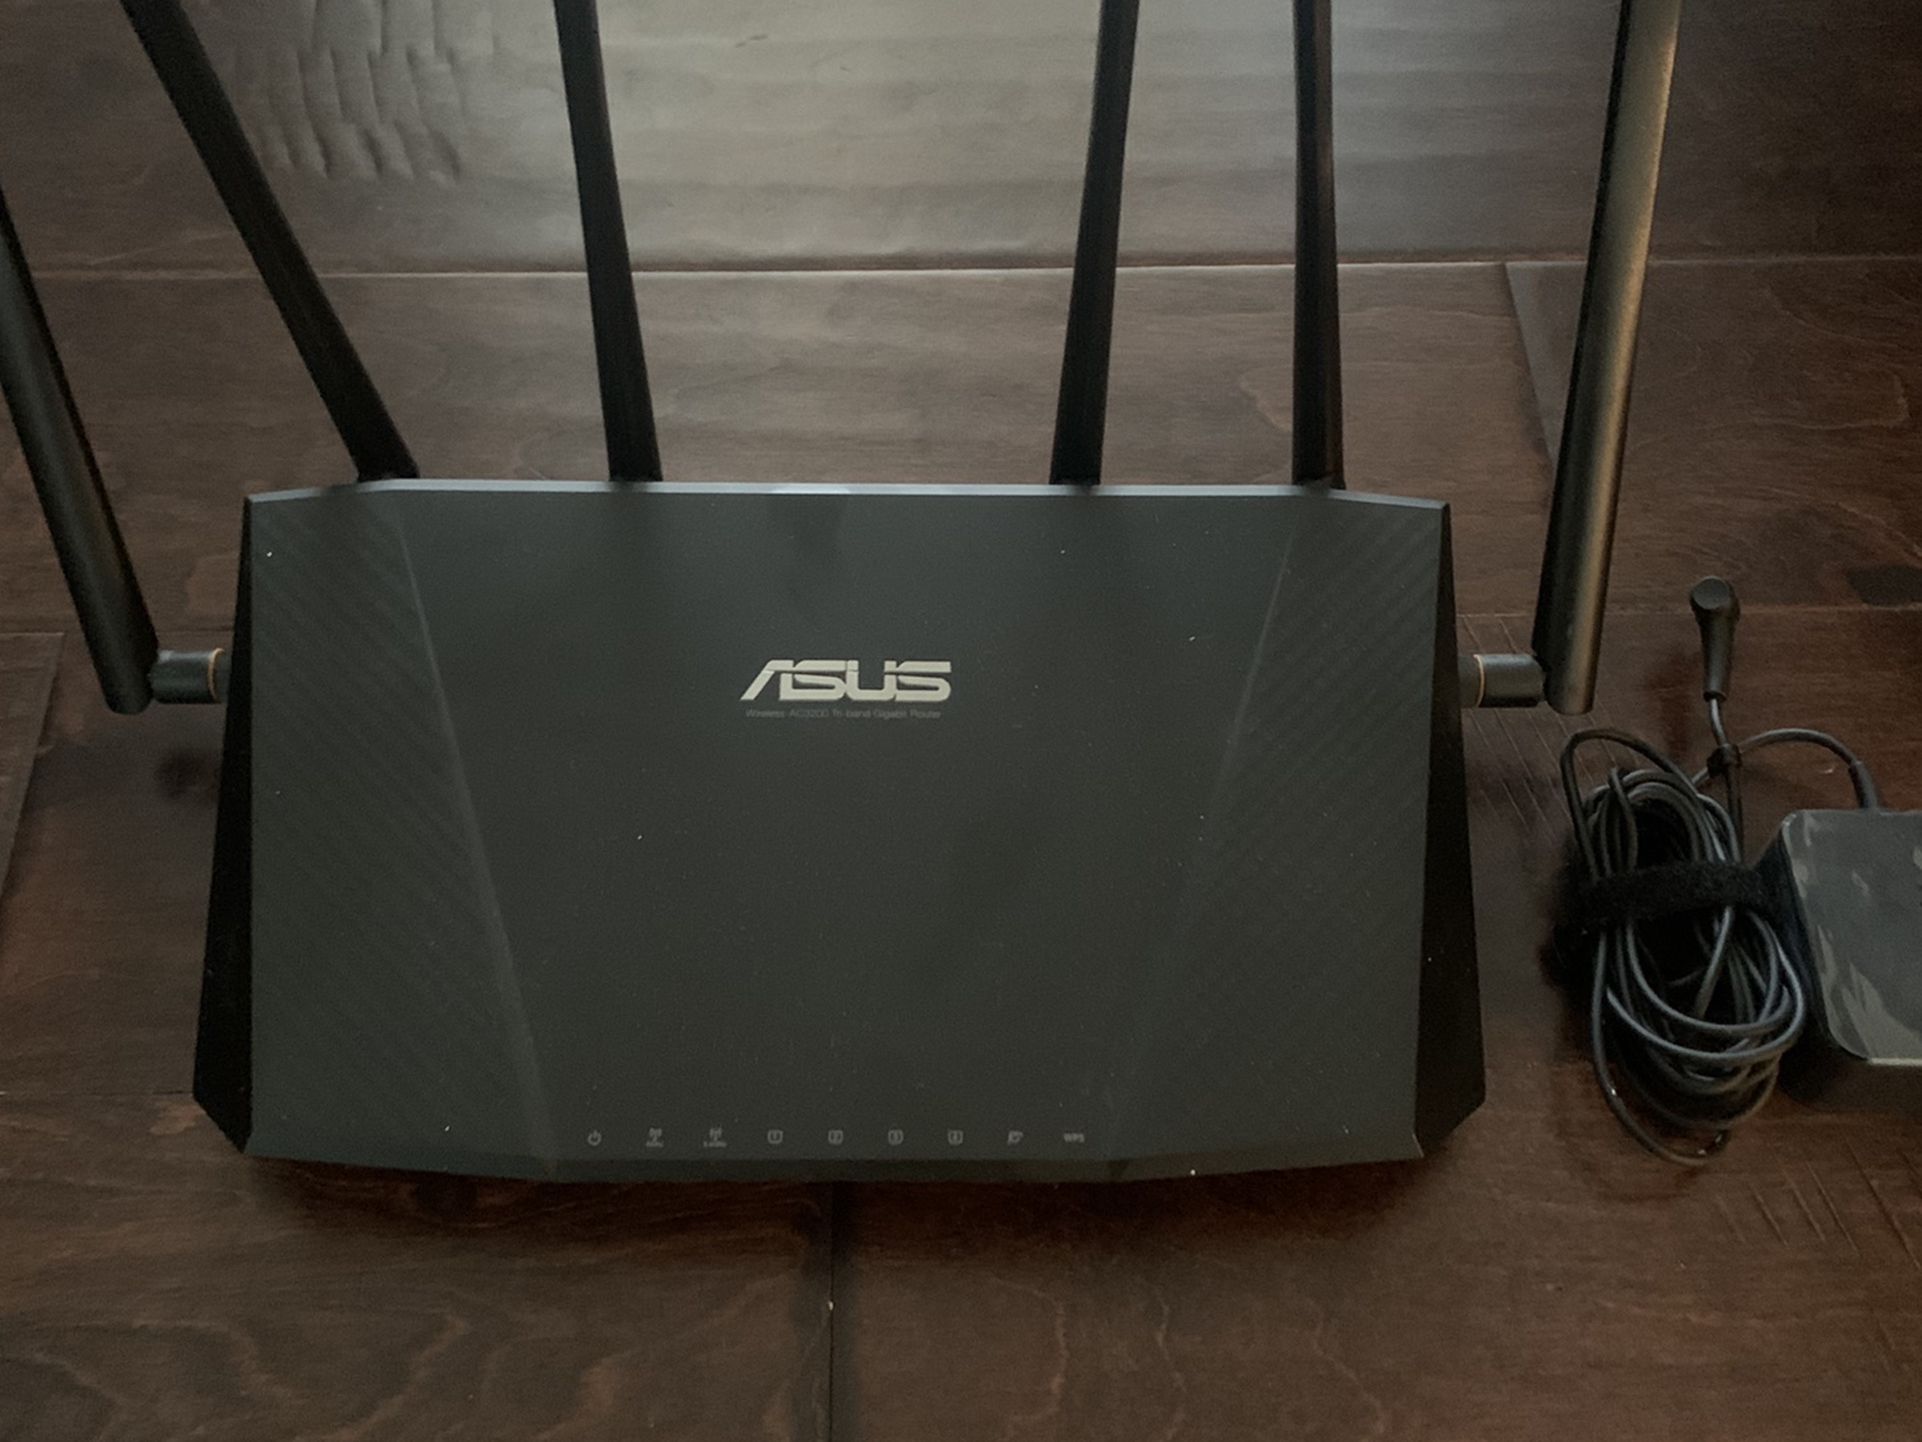 Asus RT-AC3200 Router